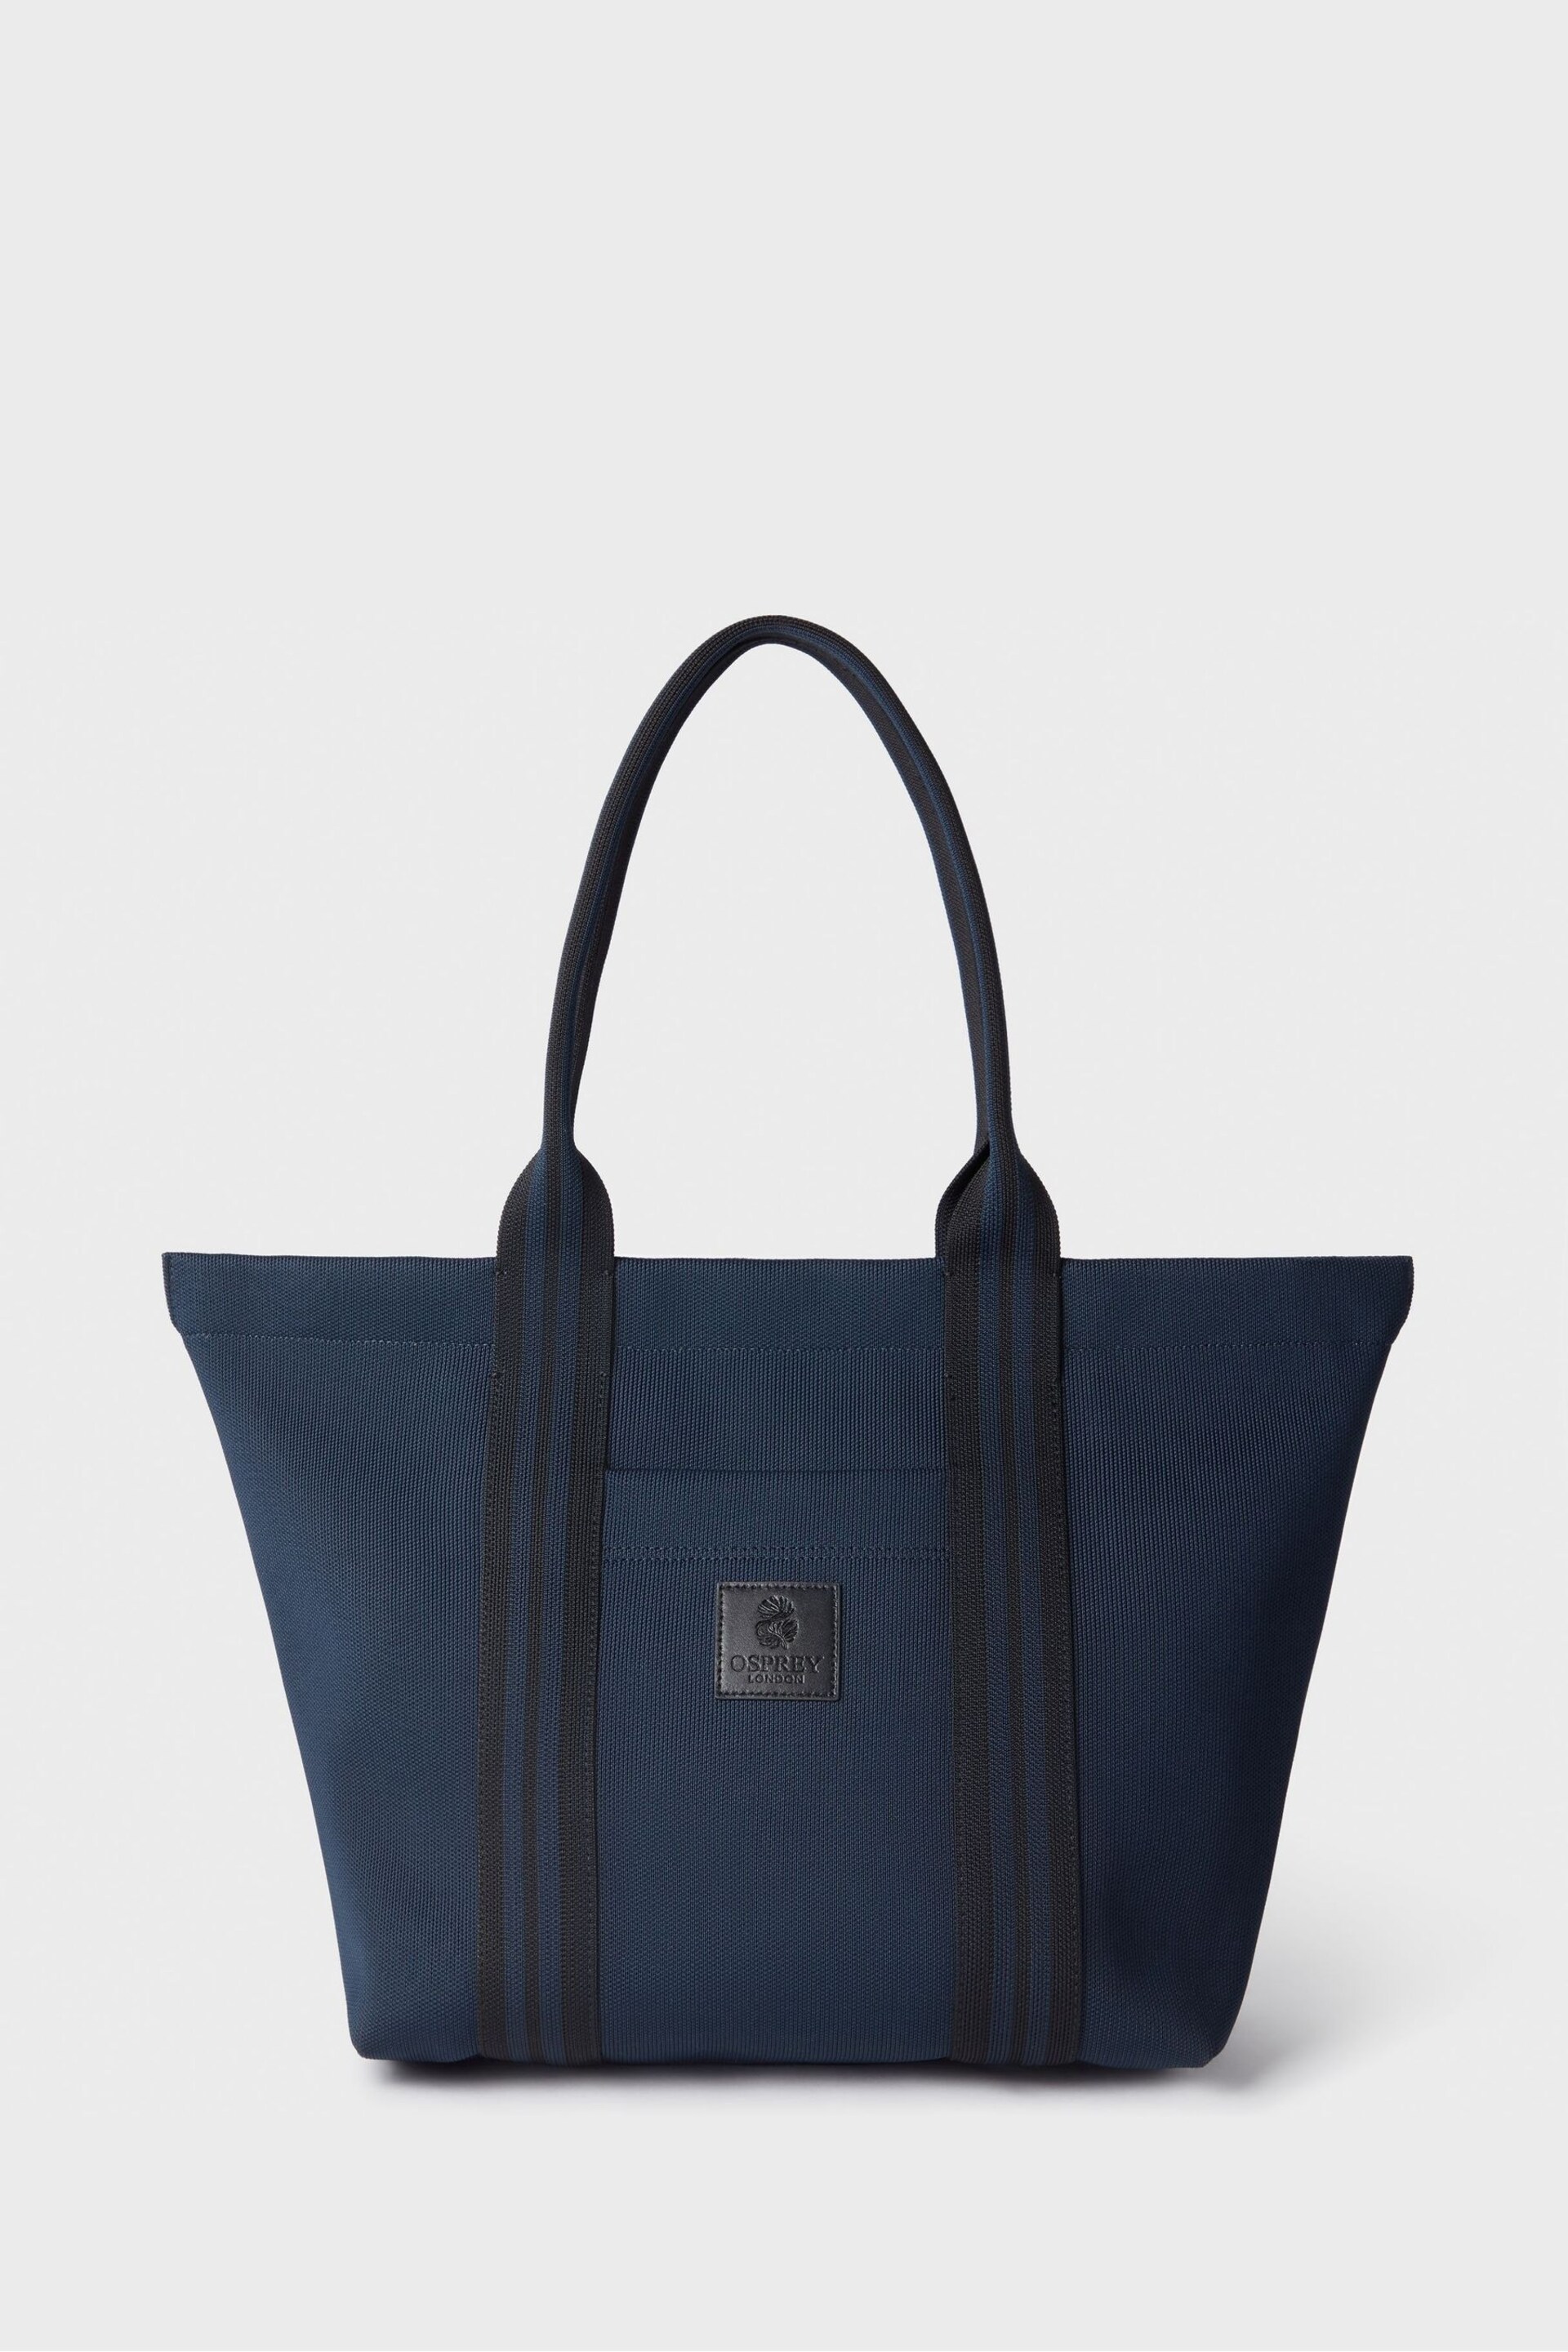 Osprey London The Knitted Tote Bag - Image 1 of 5